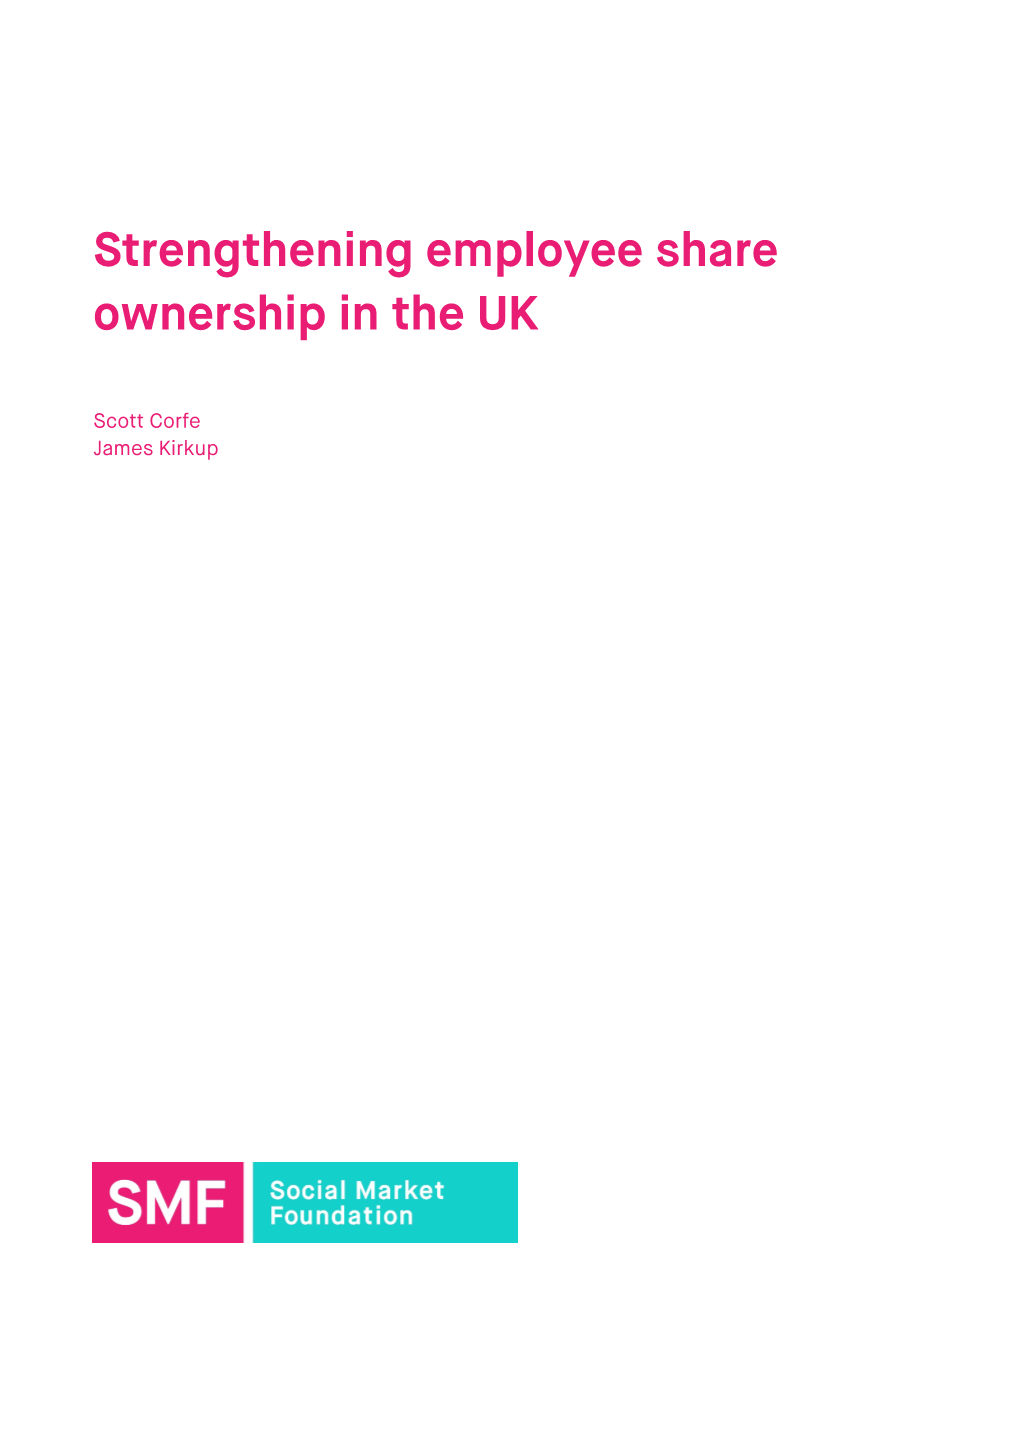 Strengthening Employee Share Ownership in the UK